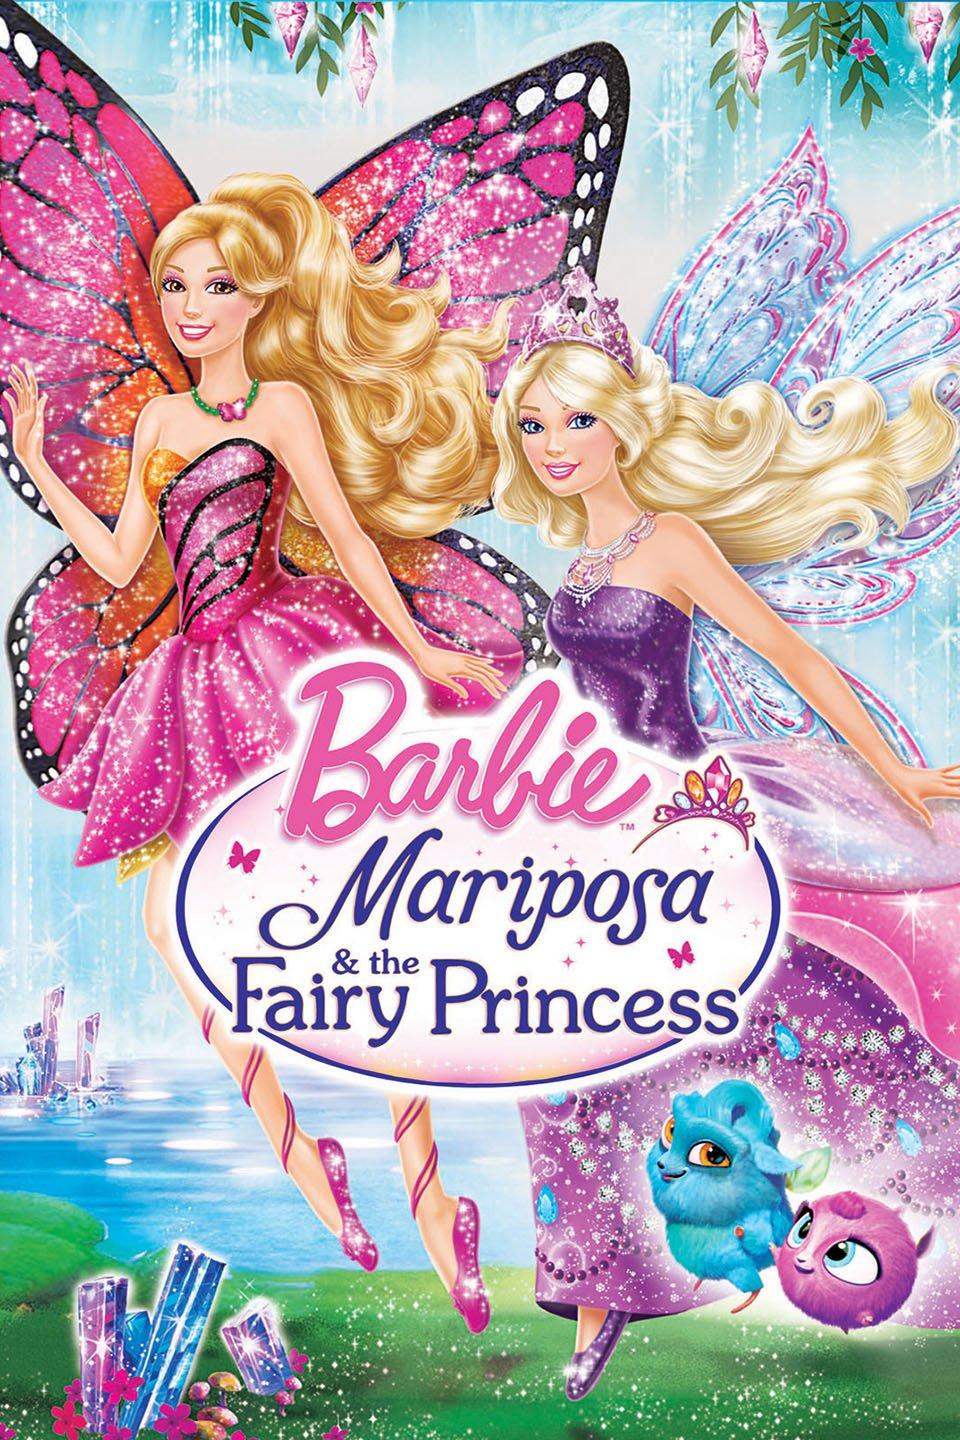 Barbie Movies Gallery: Barbie Mariposa and the Fairy